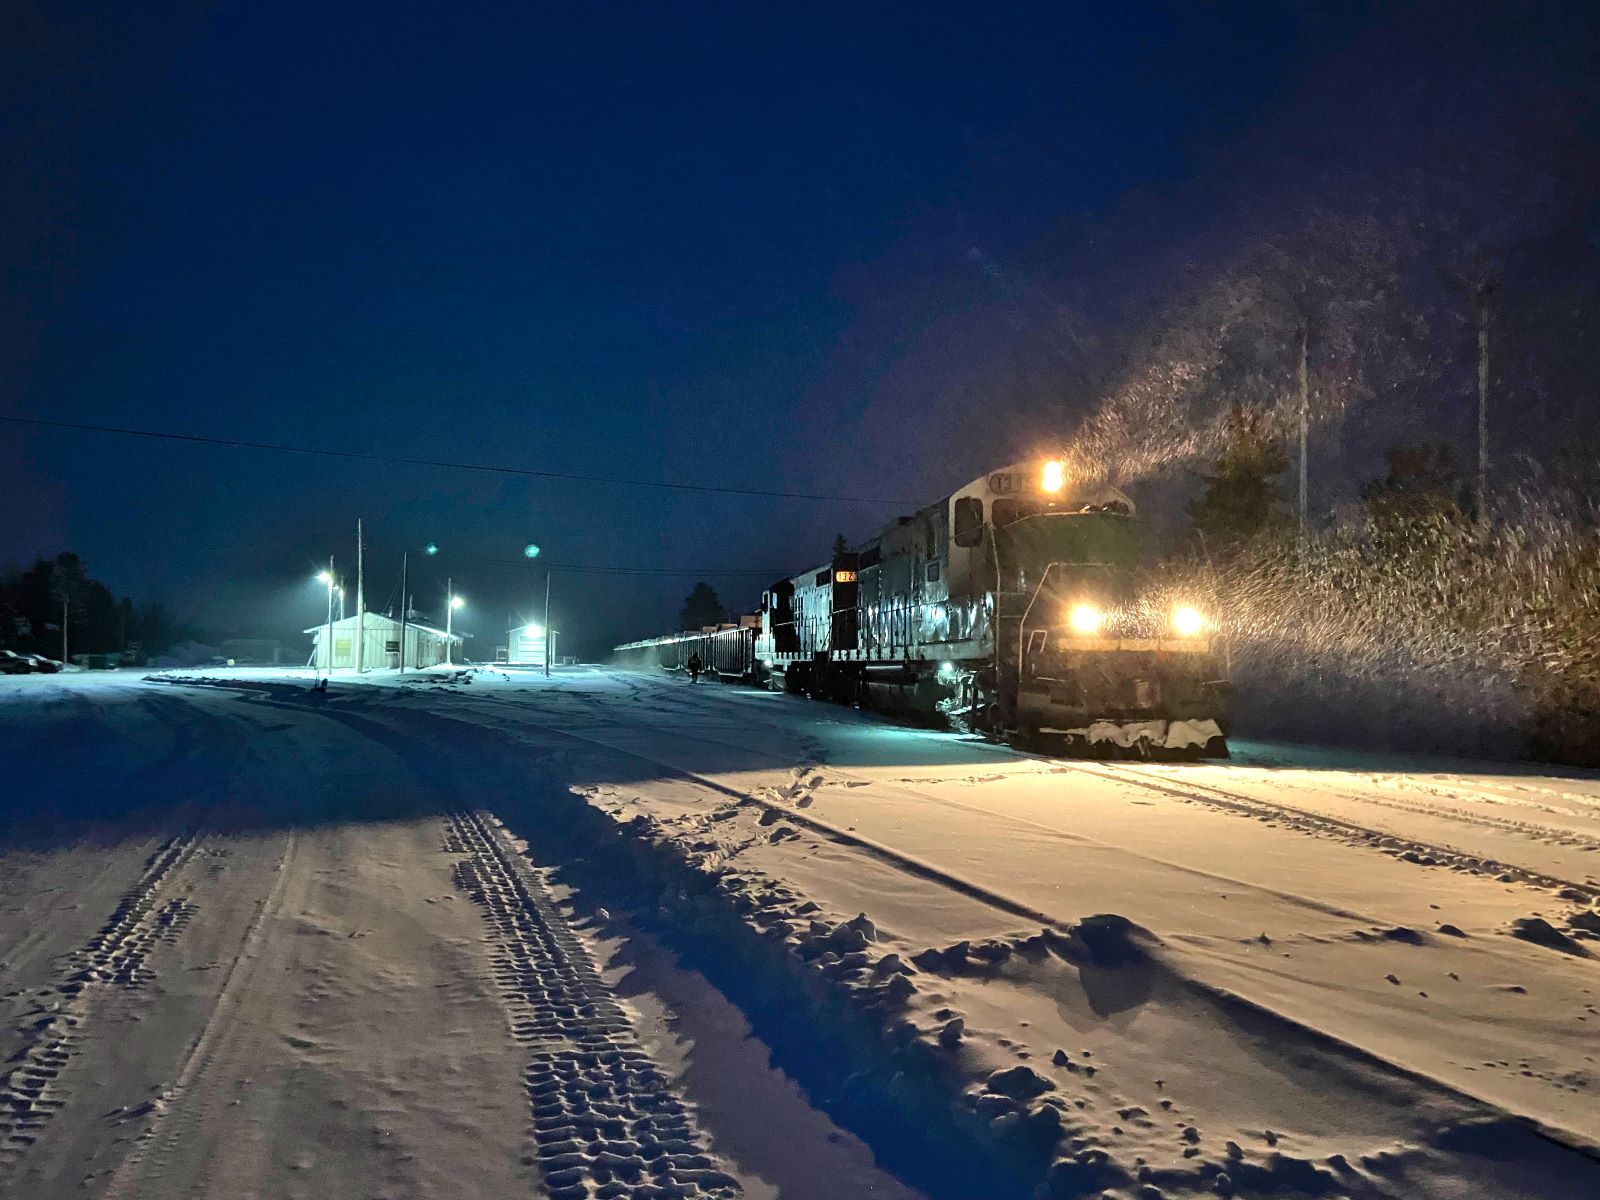 image of train in snowstorm